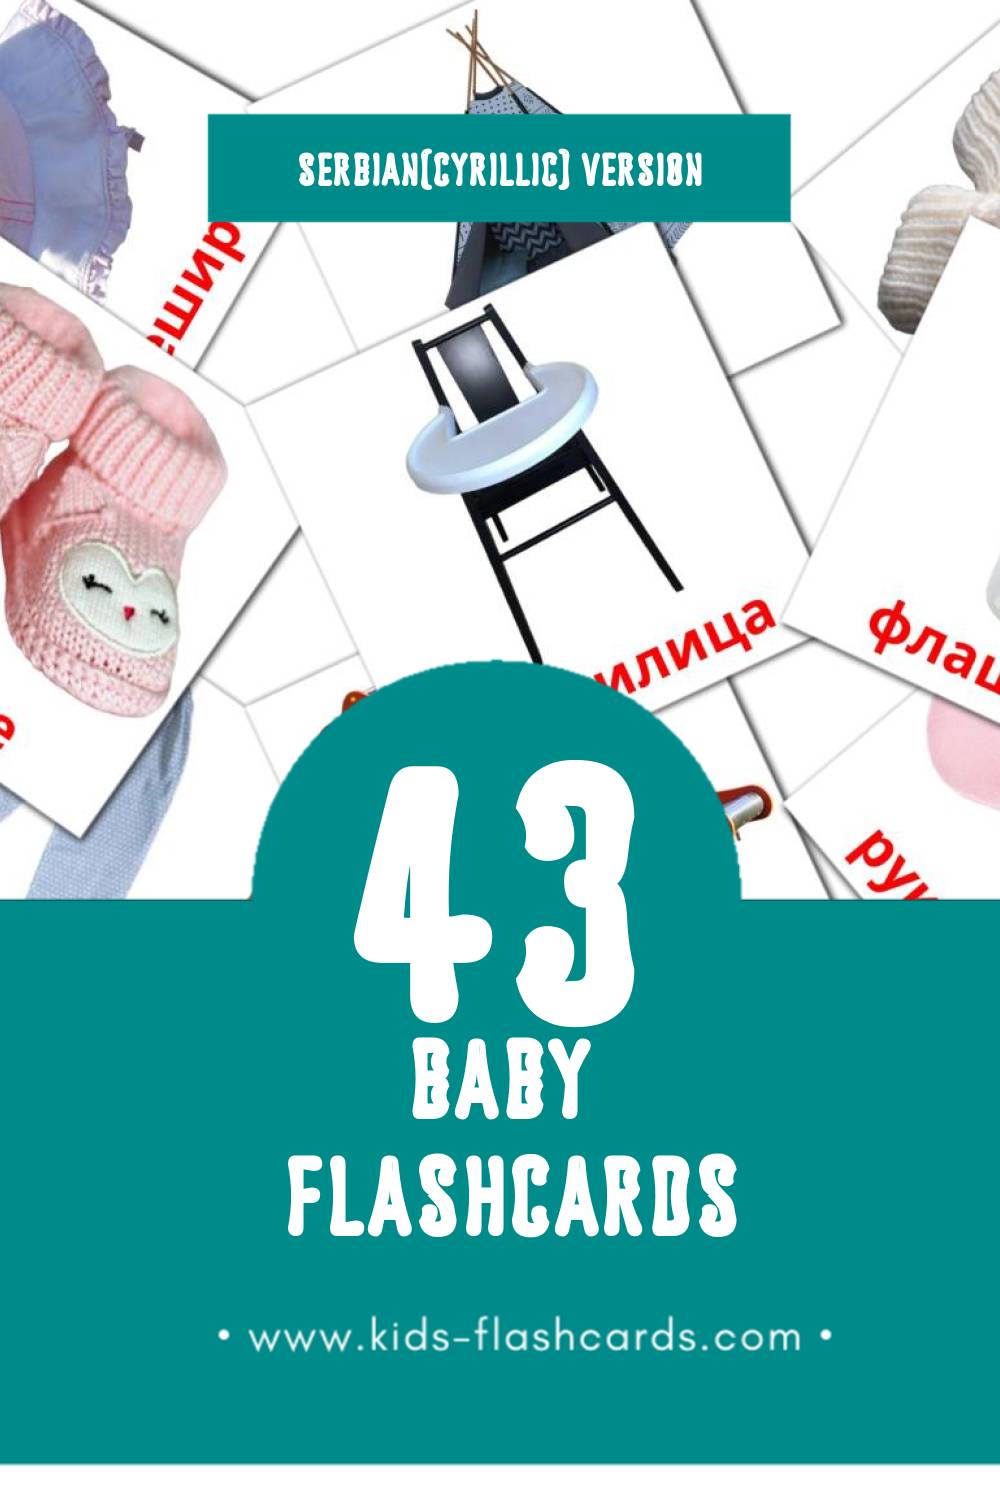 Visual Беба Flashcards for Toddlers (43 cards in Serbian(cyrillic))